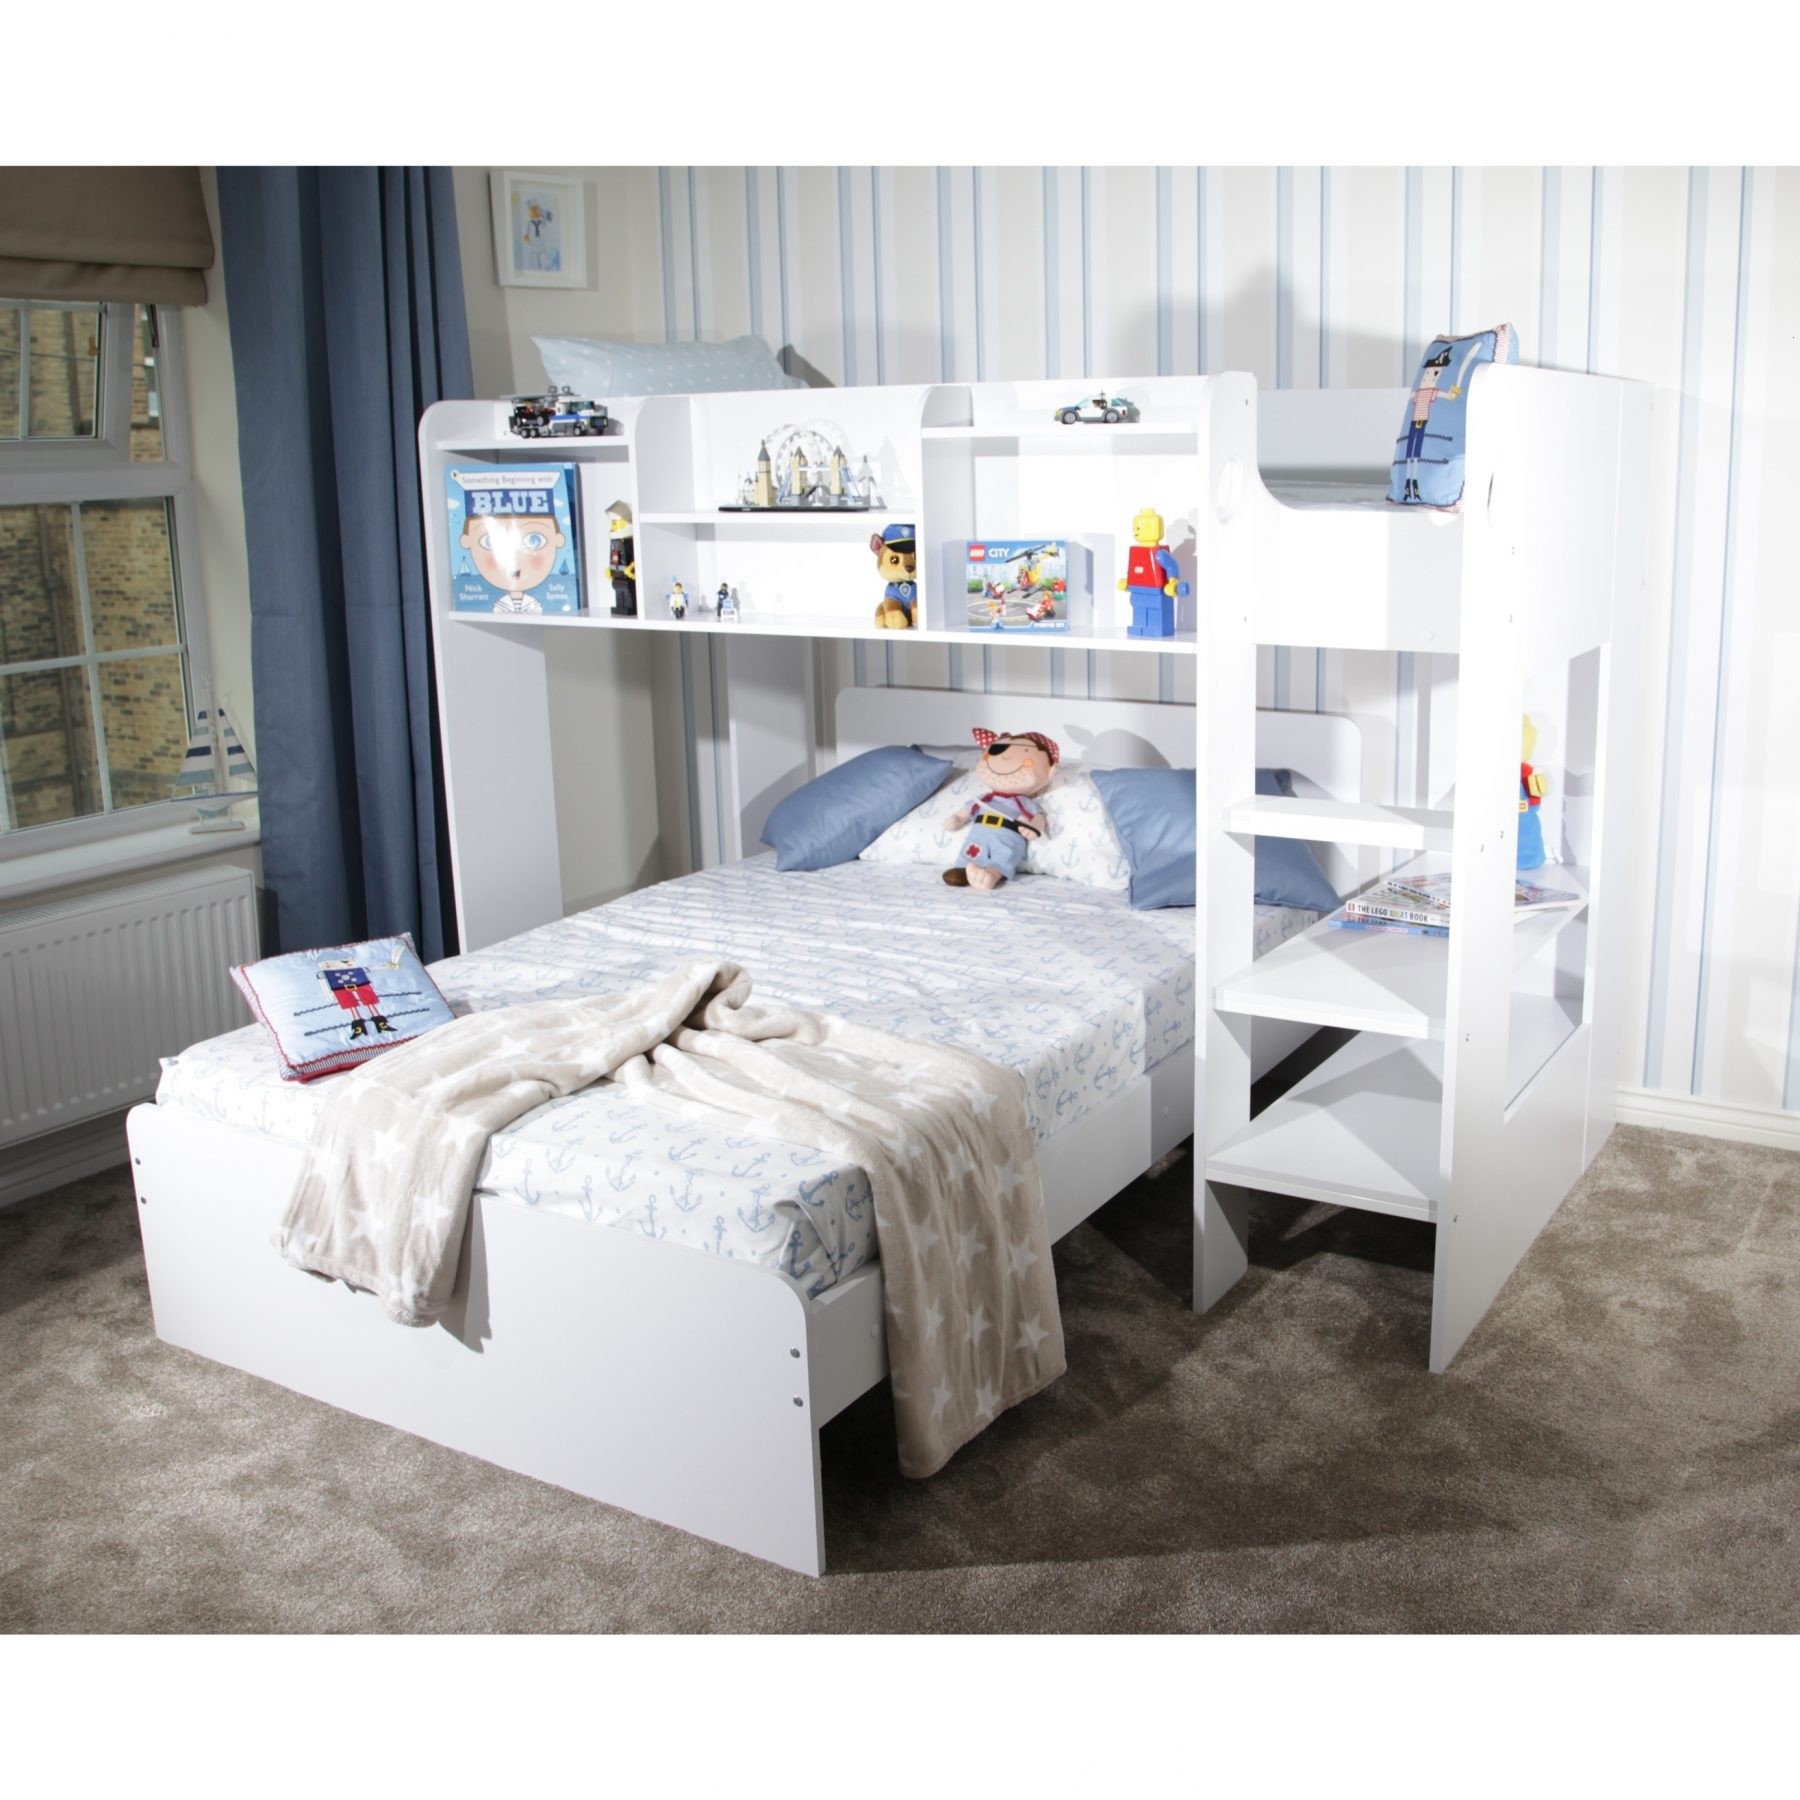 L shaped triple sleeper bunk bed childrens beds fads